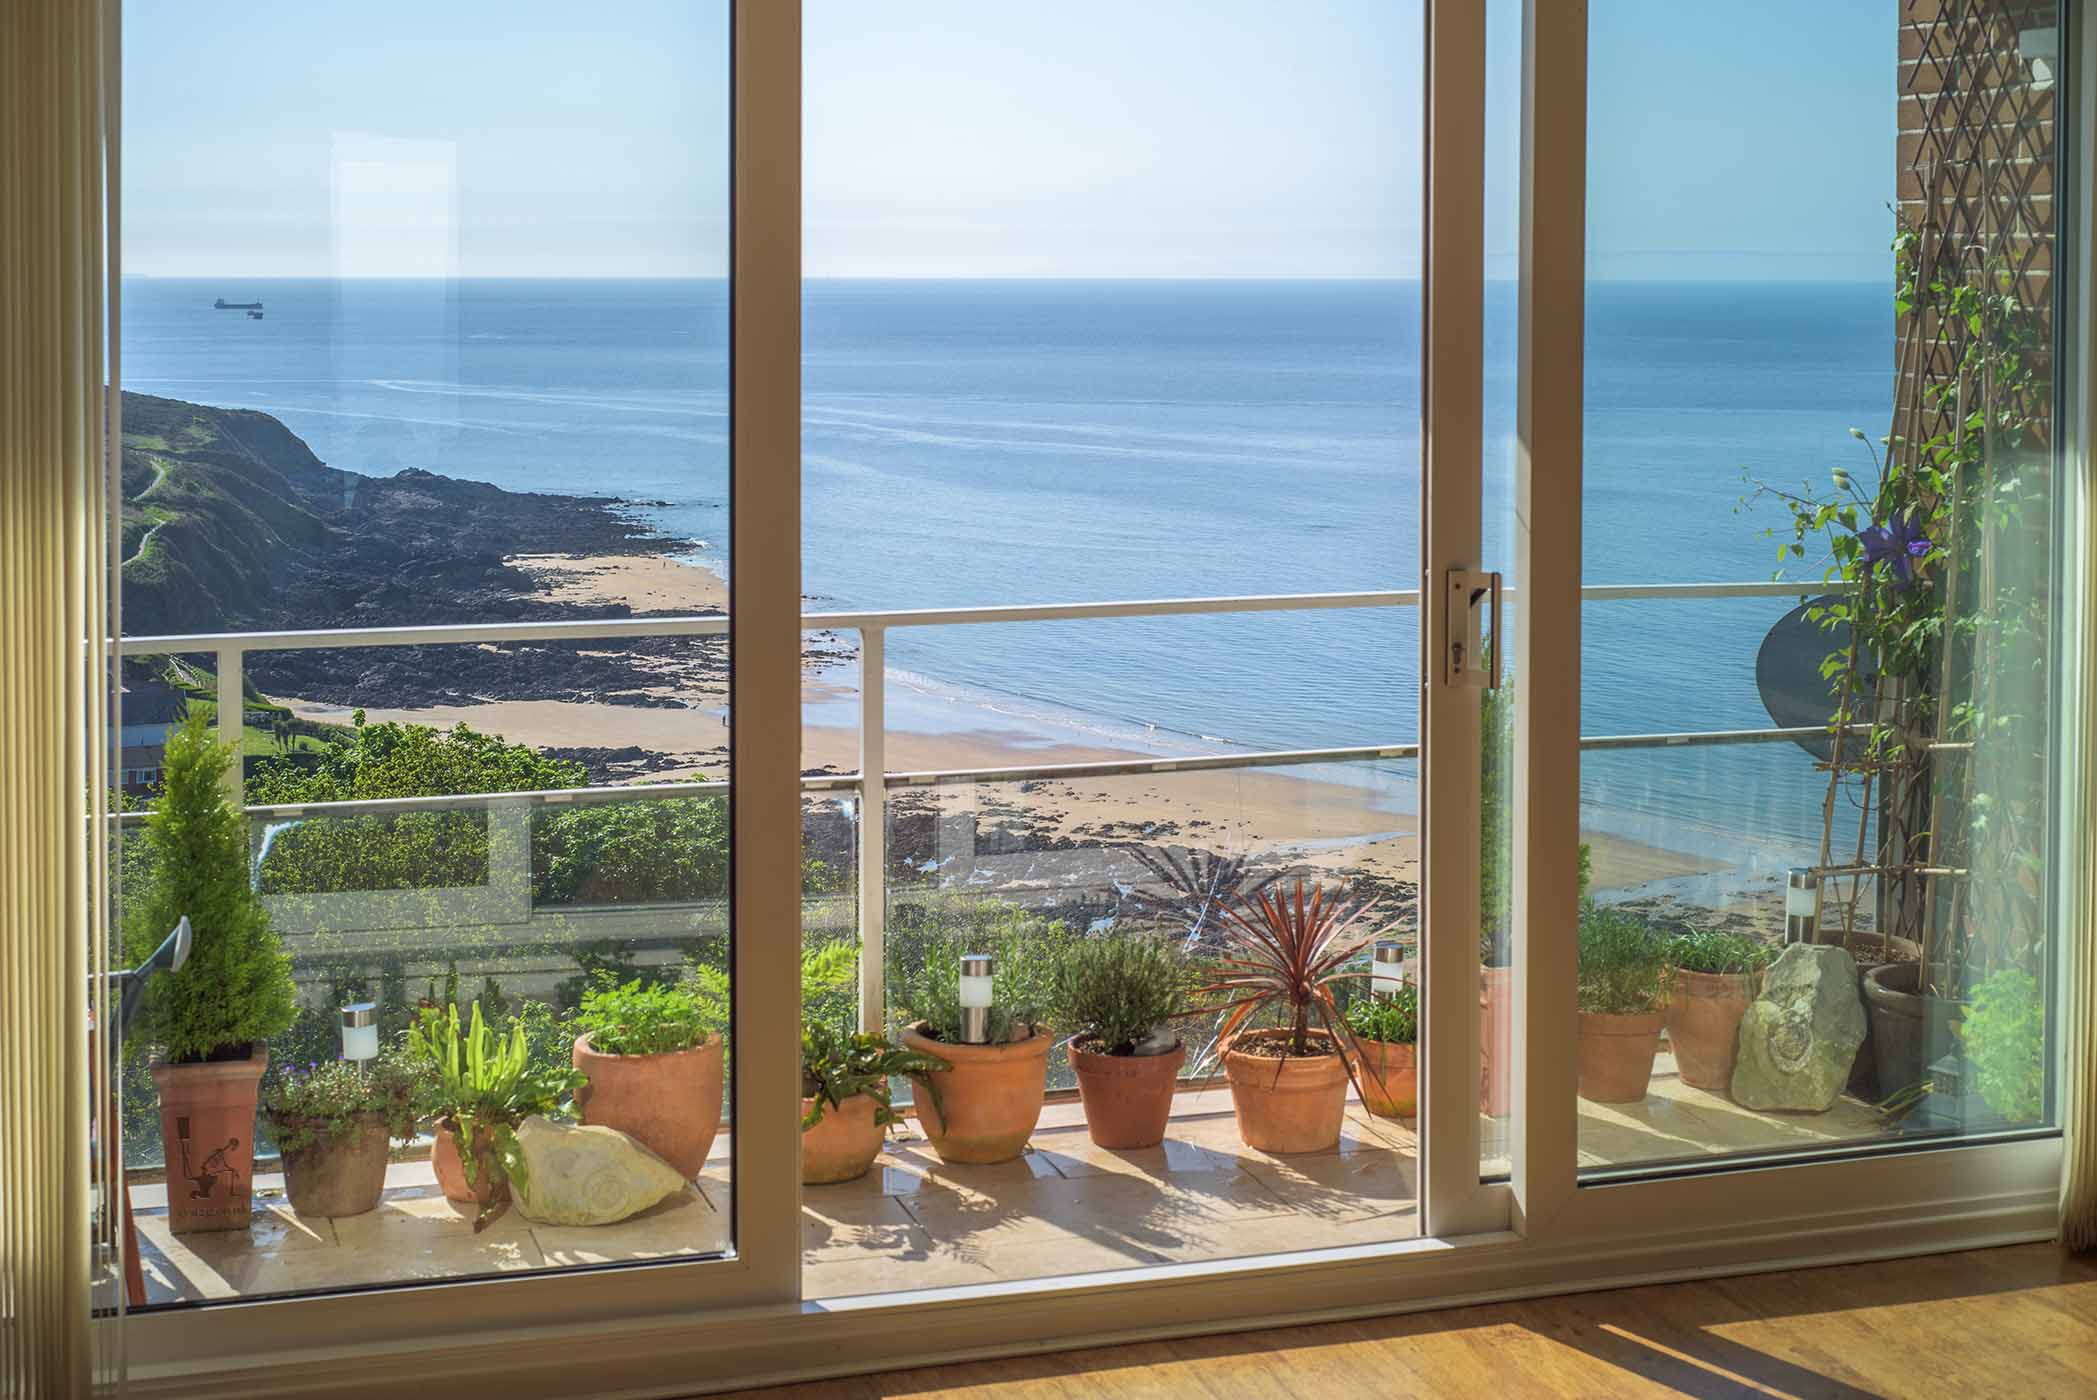 Living by the Seaside - A wonderful view from a flat that overlooks Langland Bay in South Wales.